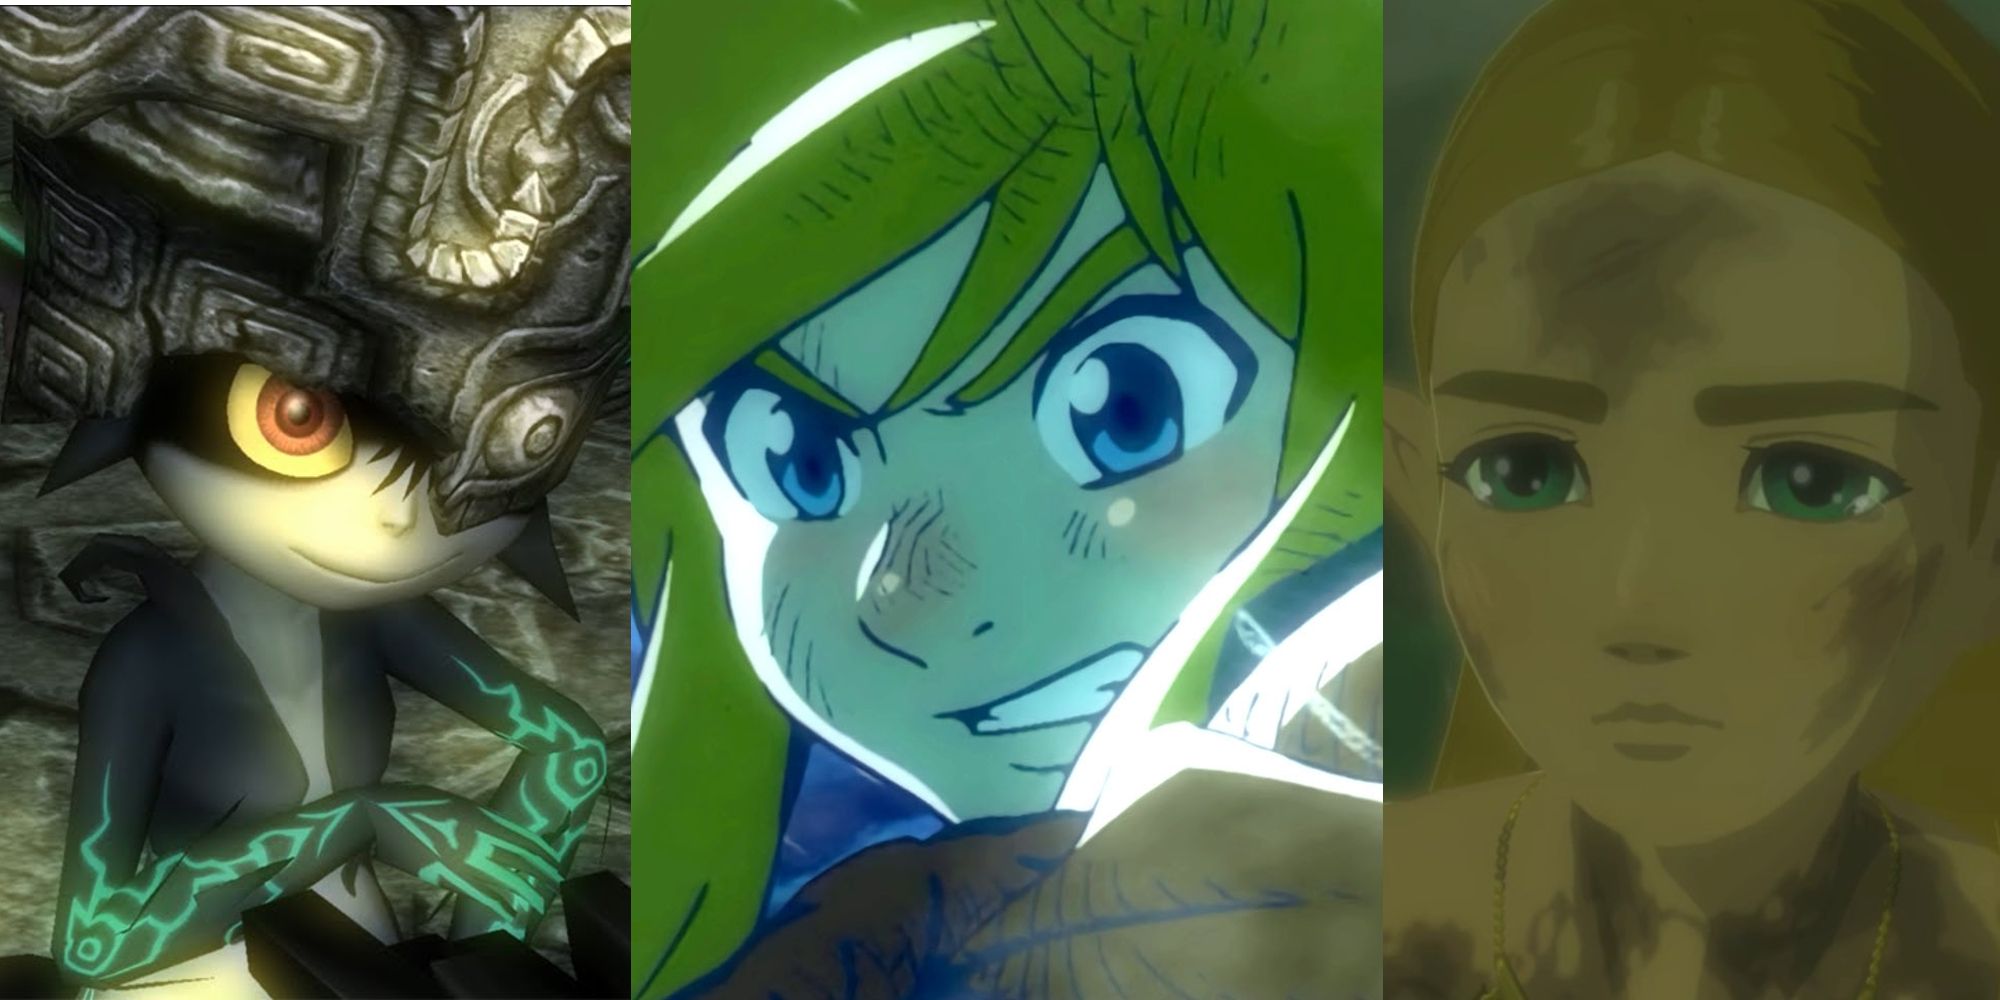 Midna kneeling; Link facing a storm; Zelda dirtied and crying